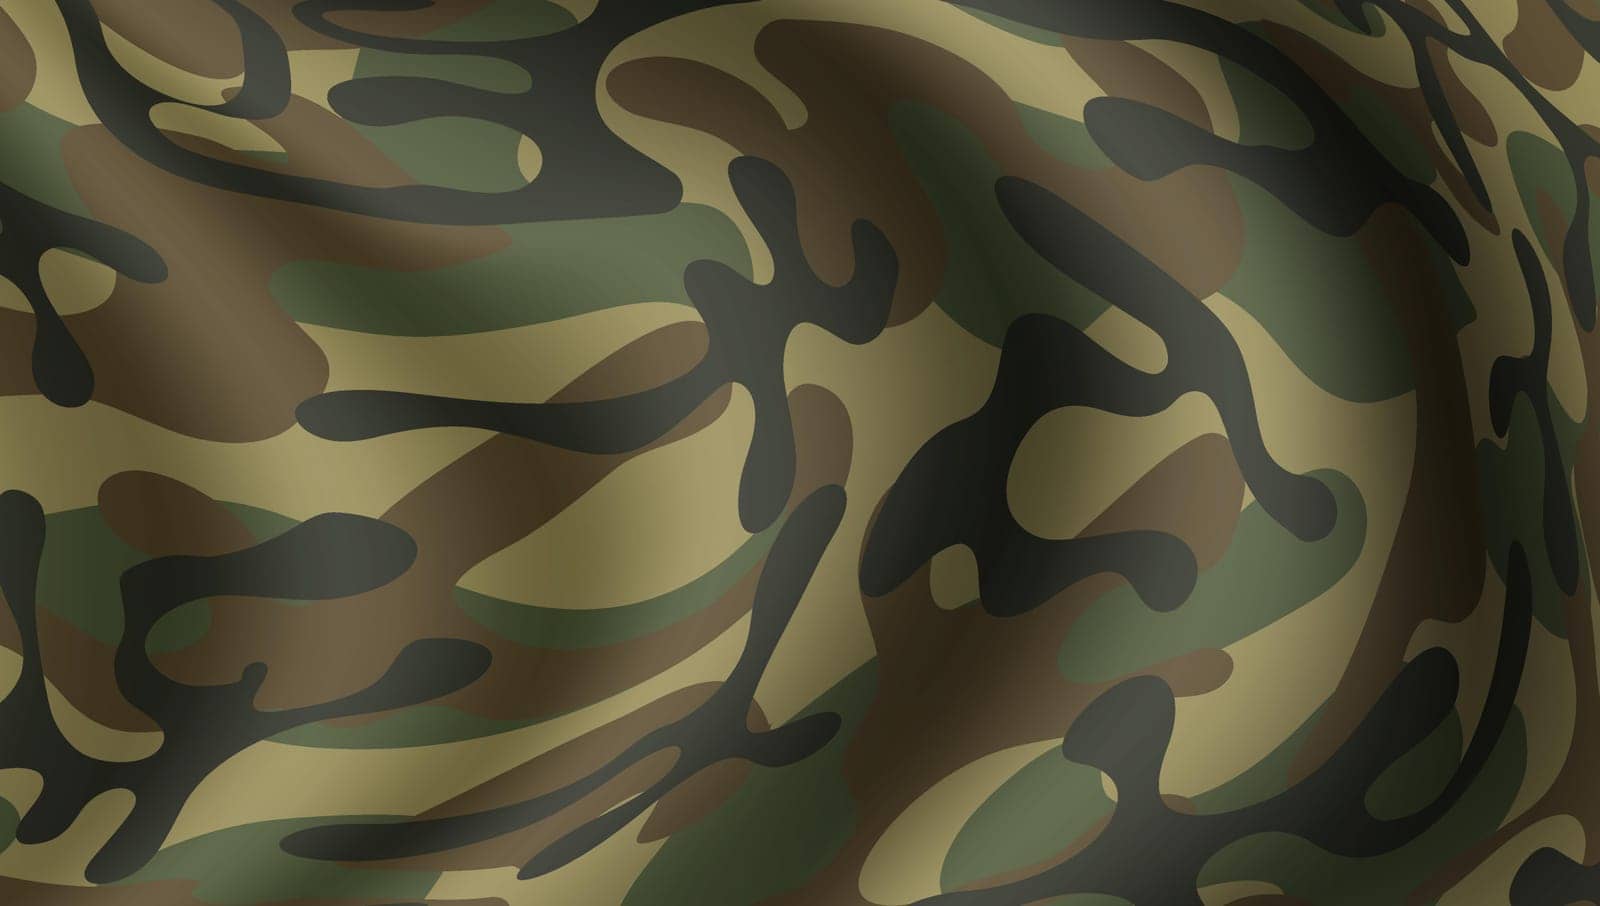 3D Military Camouflage For Army Fabric Texture Background. EPS10 Vector